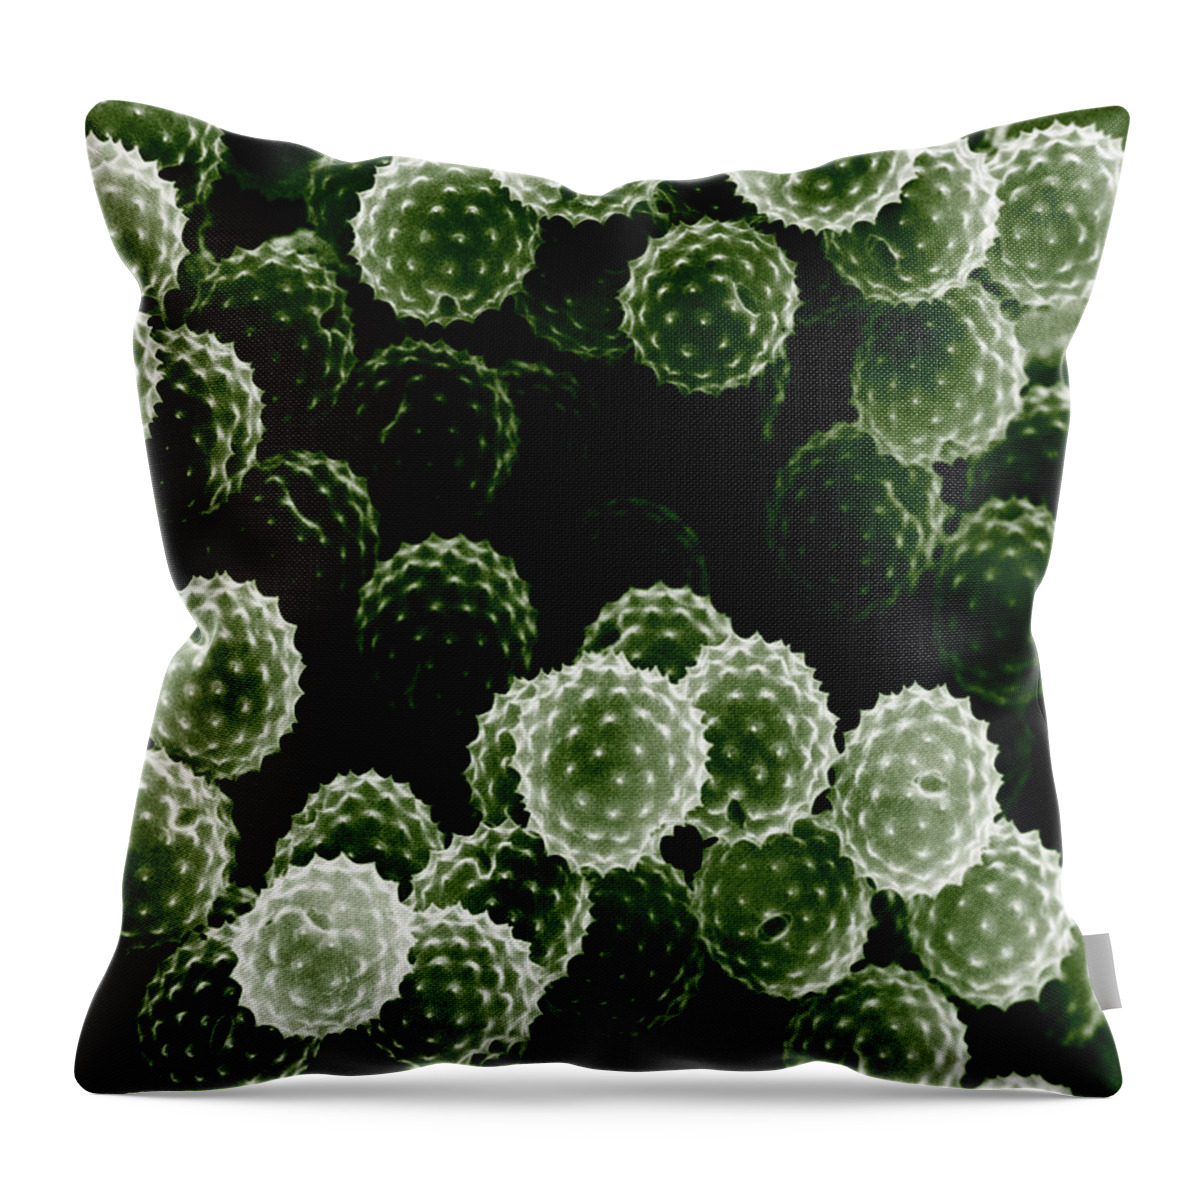 Allergen Throw Pillow featuring the photograph Ragweed Pollen Sem by David M. Phillips / The Population Council